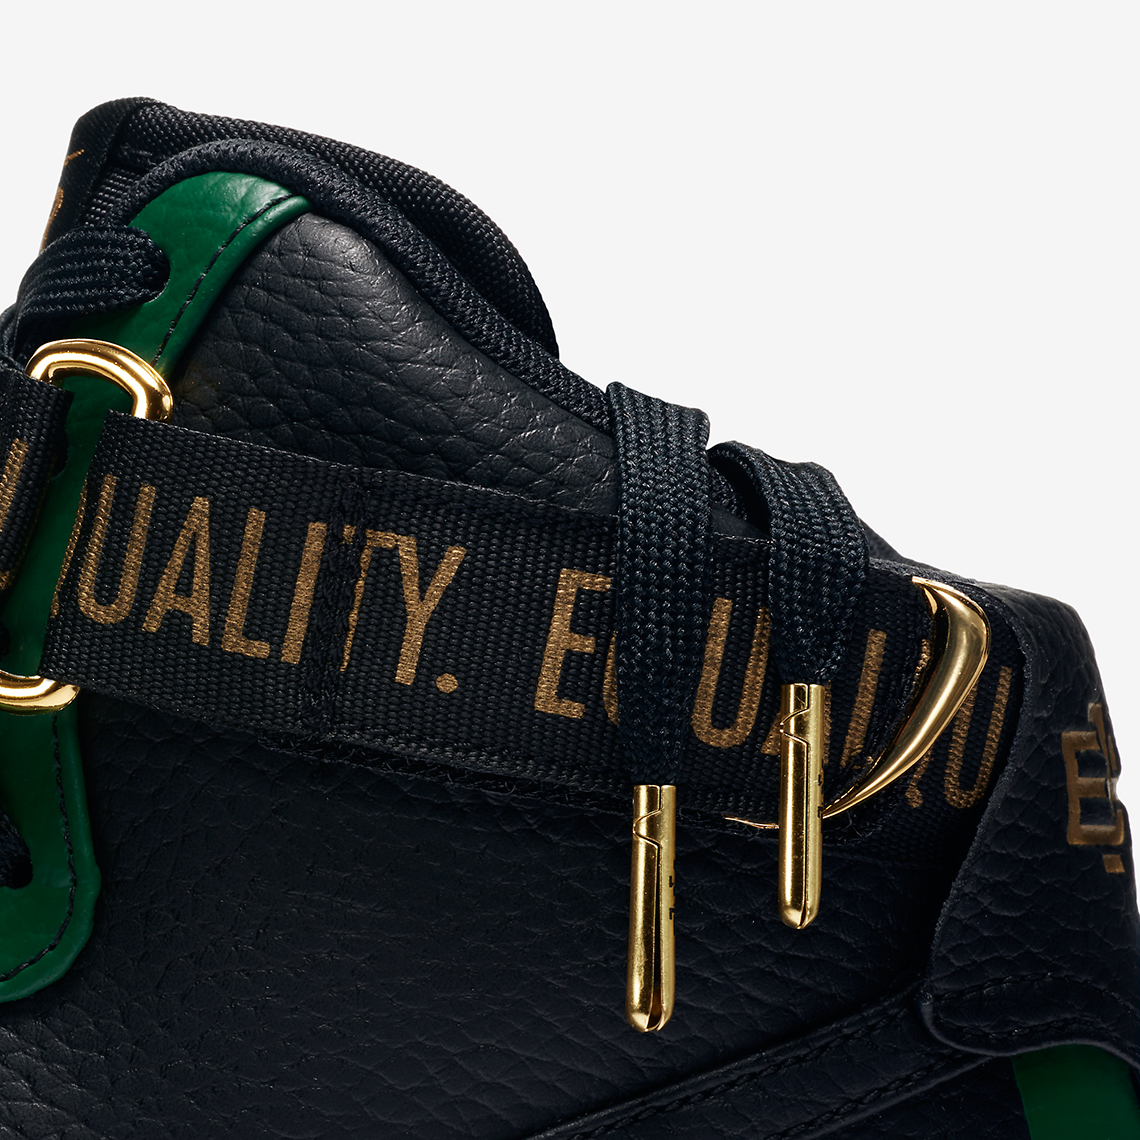 Nike Air Force 1 High Bhm 836227 002 Official Images 1